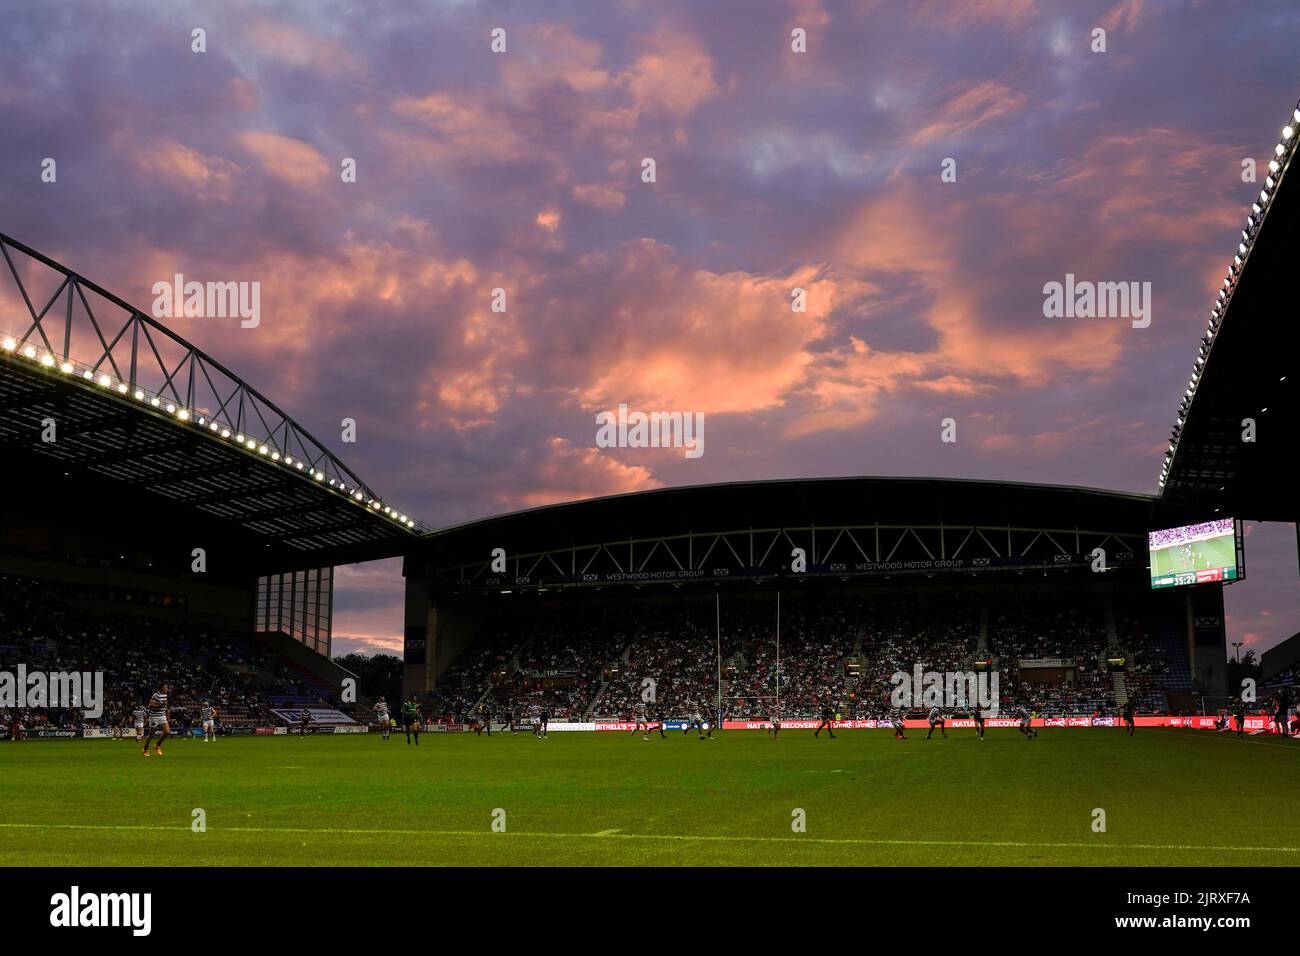 General view of the The DW Stadium during the Wigan Warriors -V- St Helens derby match Stock Photo